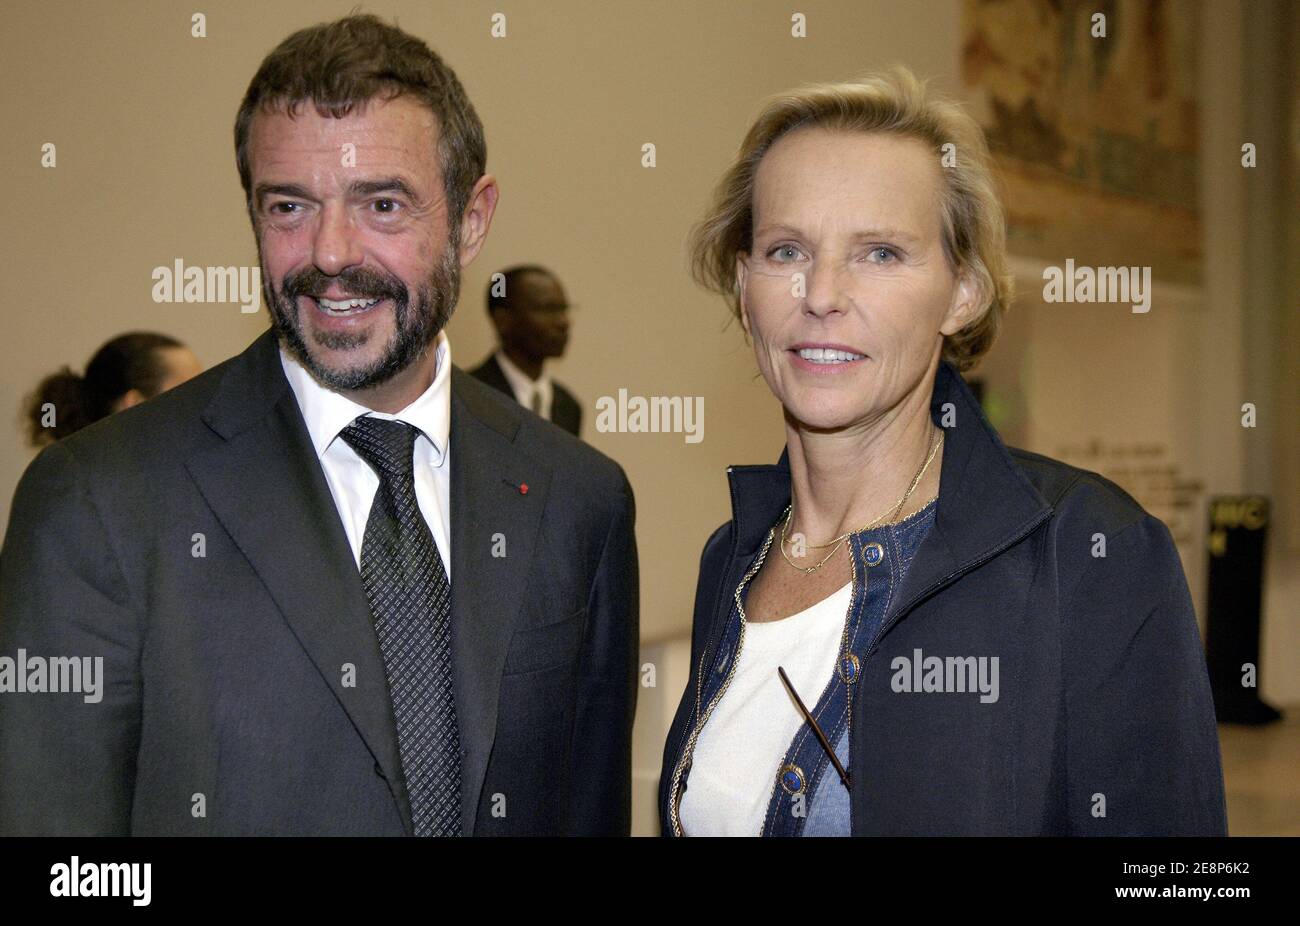 French CEO of Radio France Jean-Paul Cluzel and French journalist Christine  Ockrent attend the '20th anniversary' party of the french radio 'France  Info' at the the 'Cite de l'Architecture et du Patrimoine',